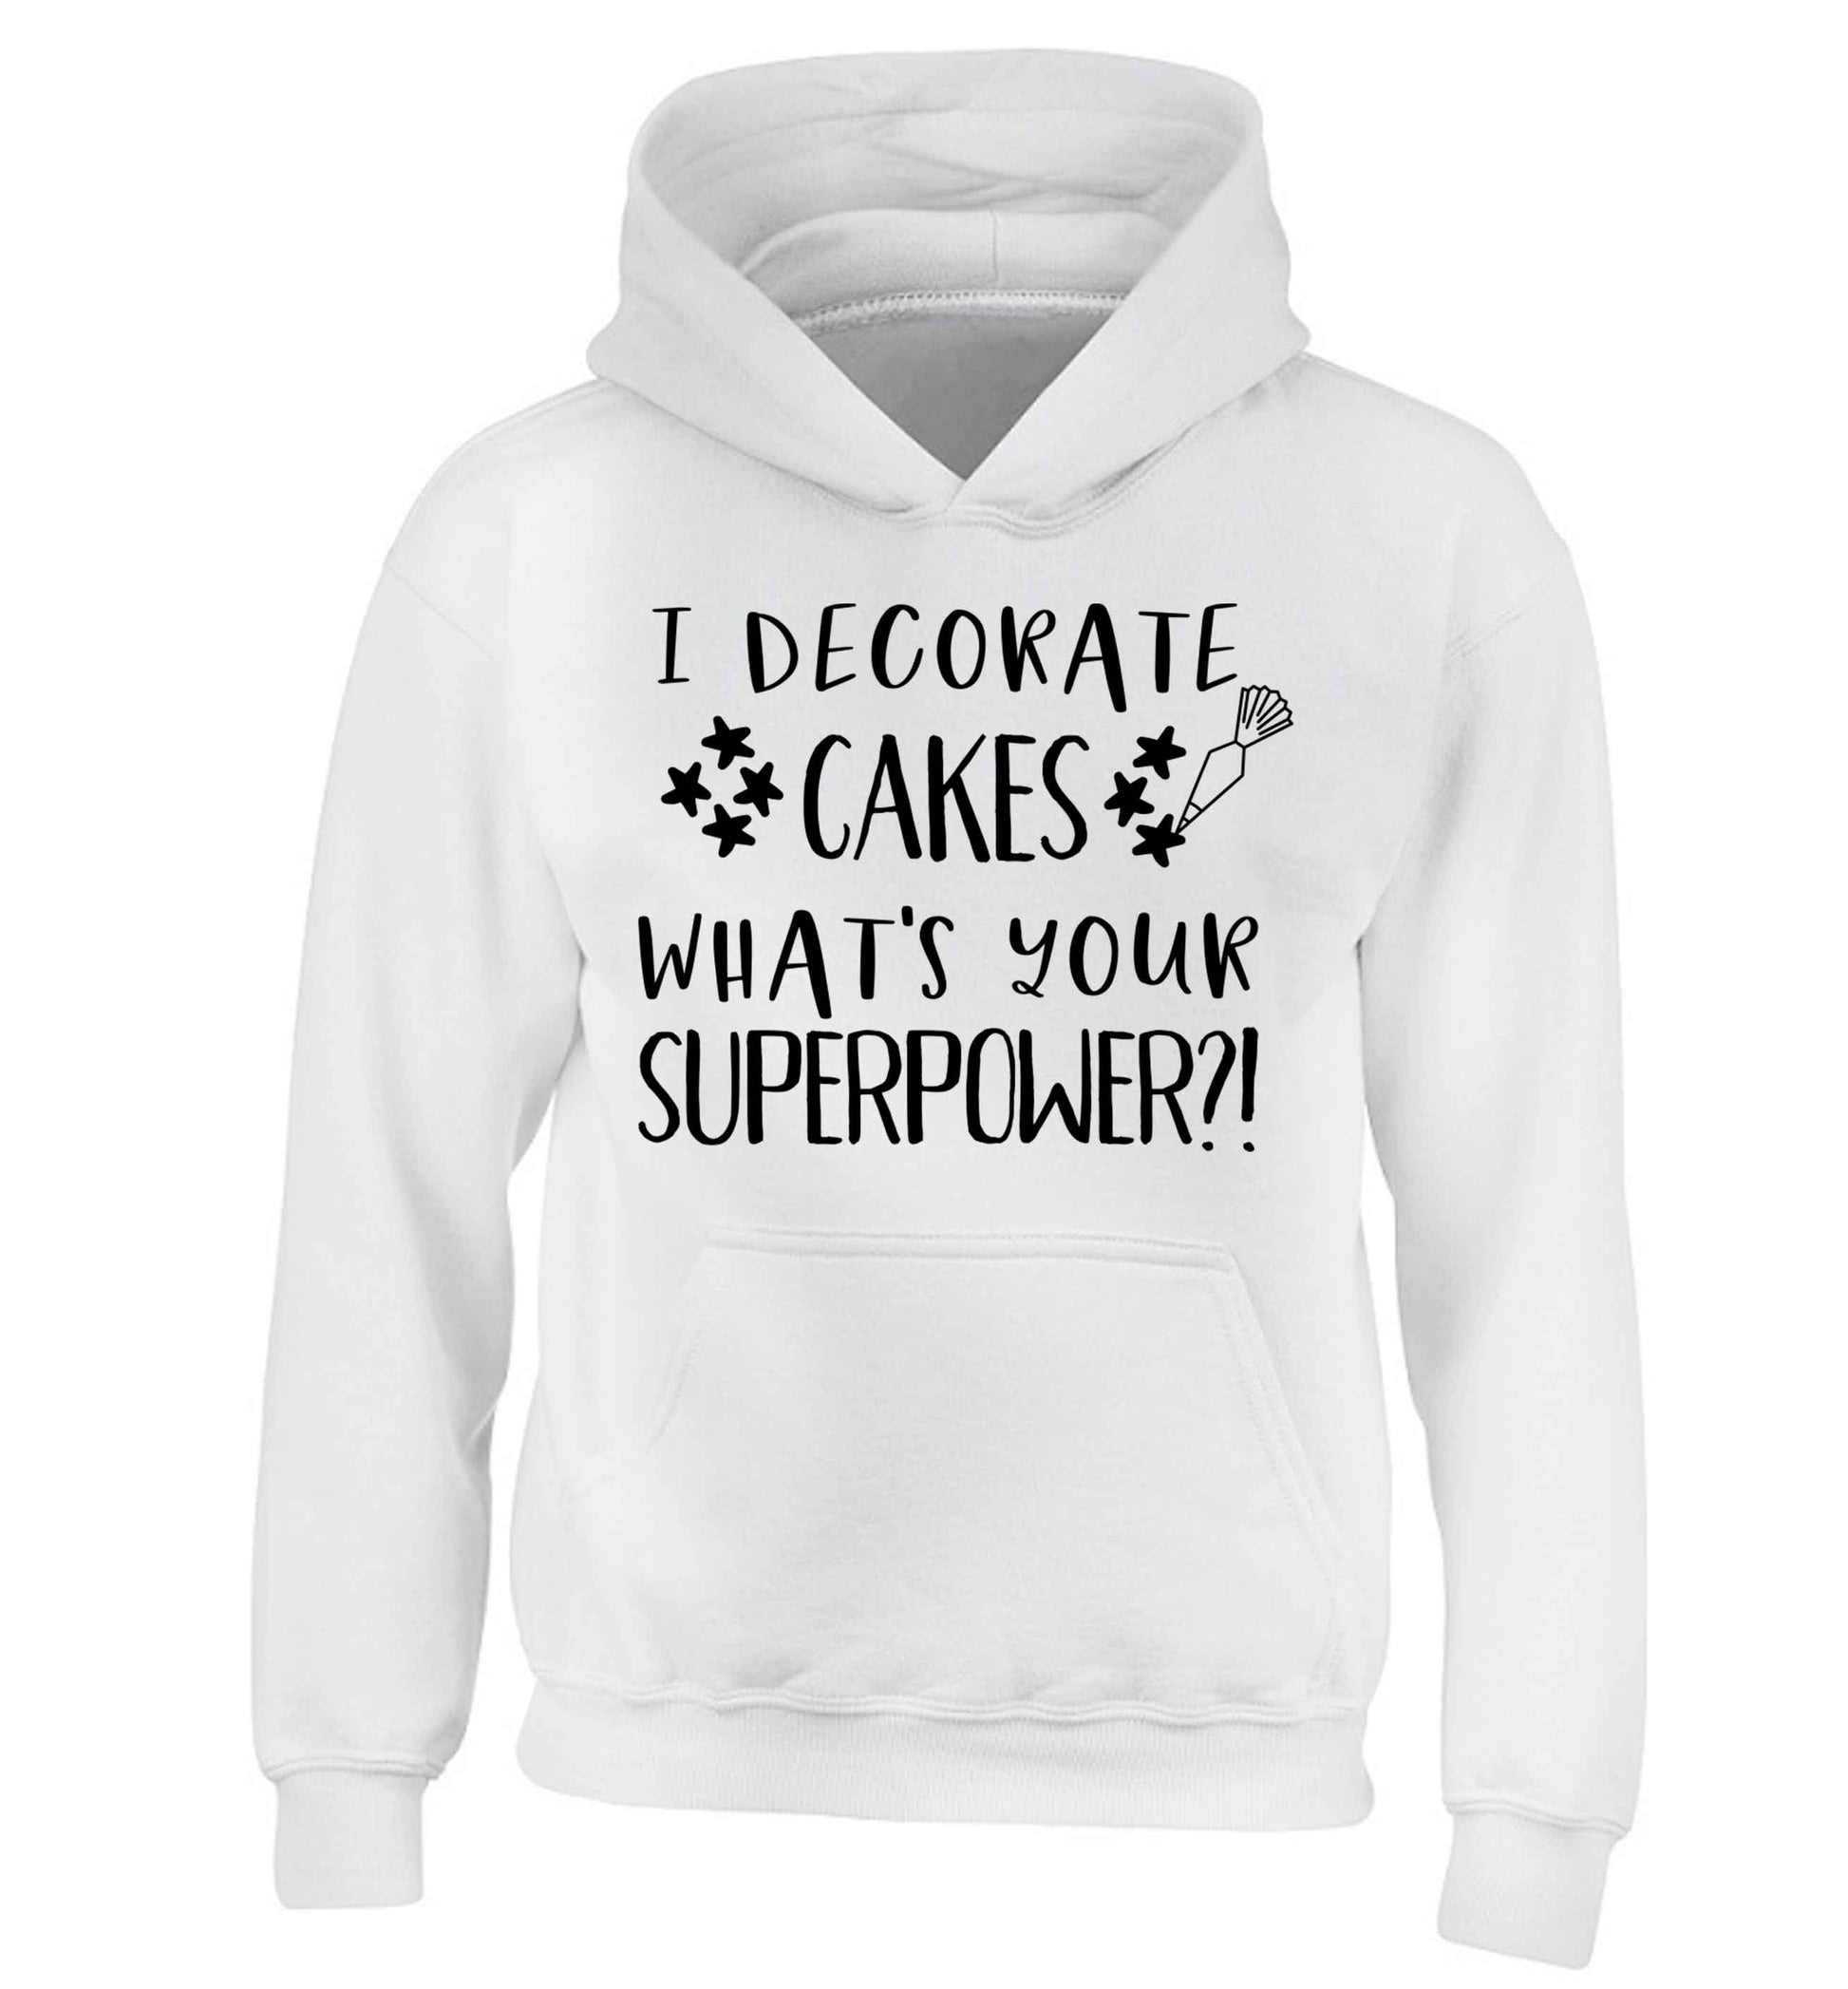 I decorate cakes what's your superpower?! children's white hoodie 12-13 Years